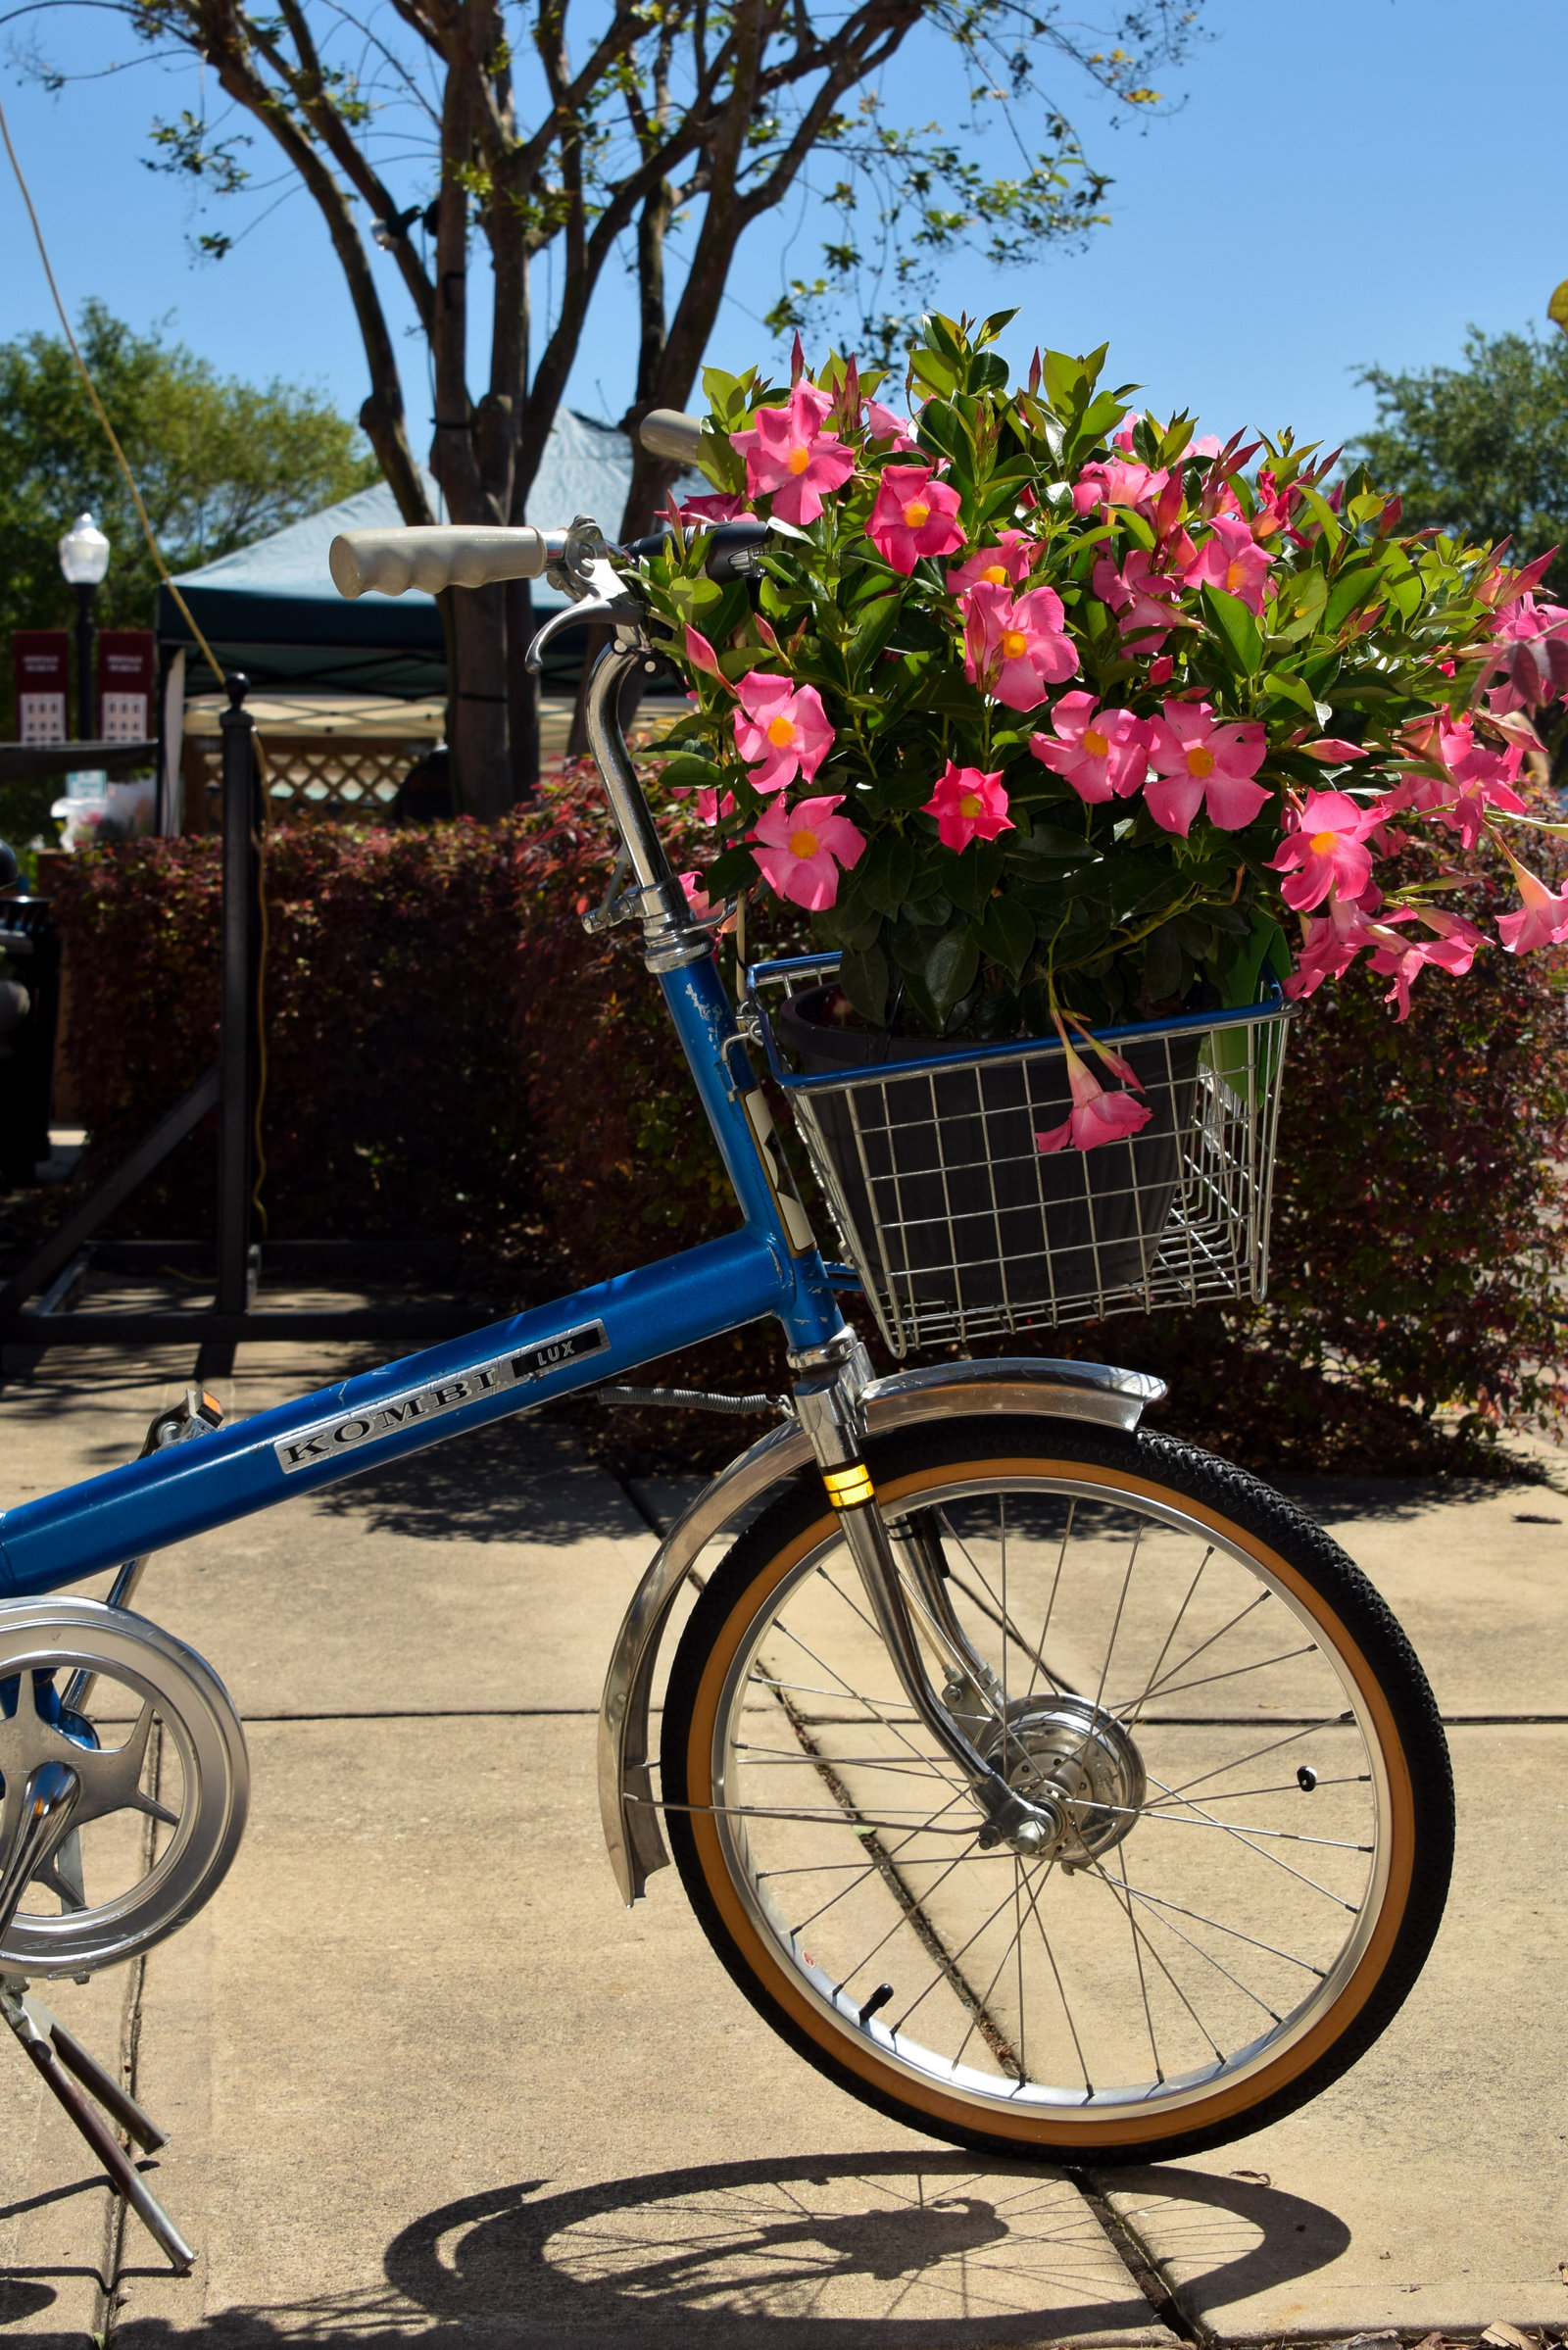 Bicycle with flowers Plant Street Winter Garden Florida